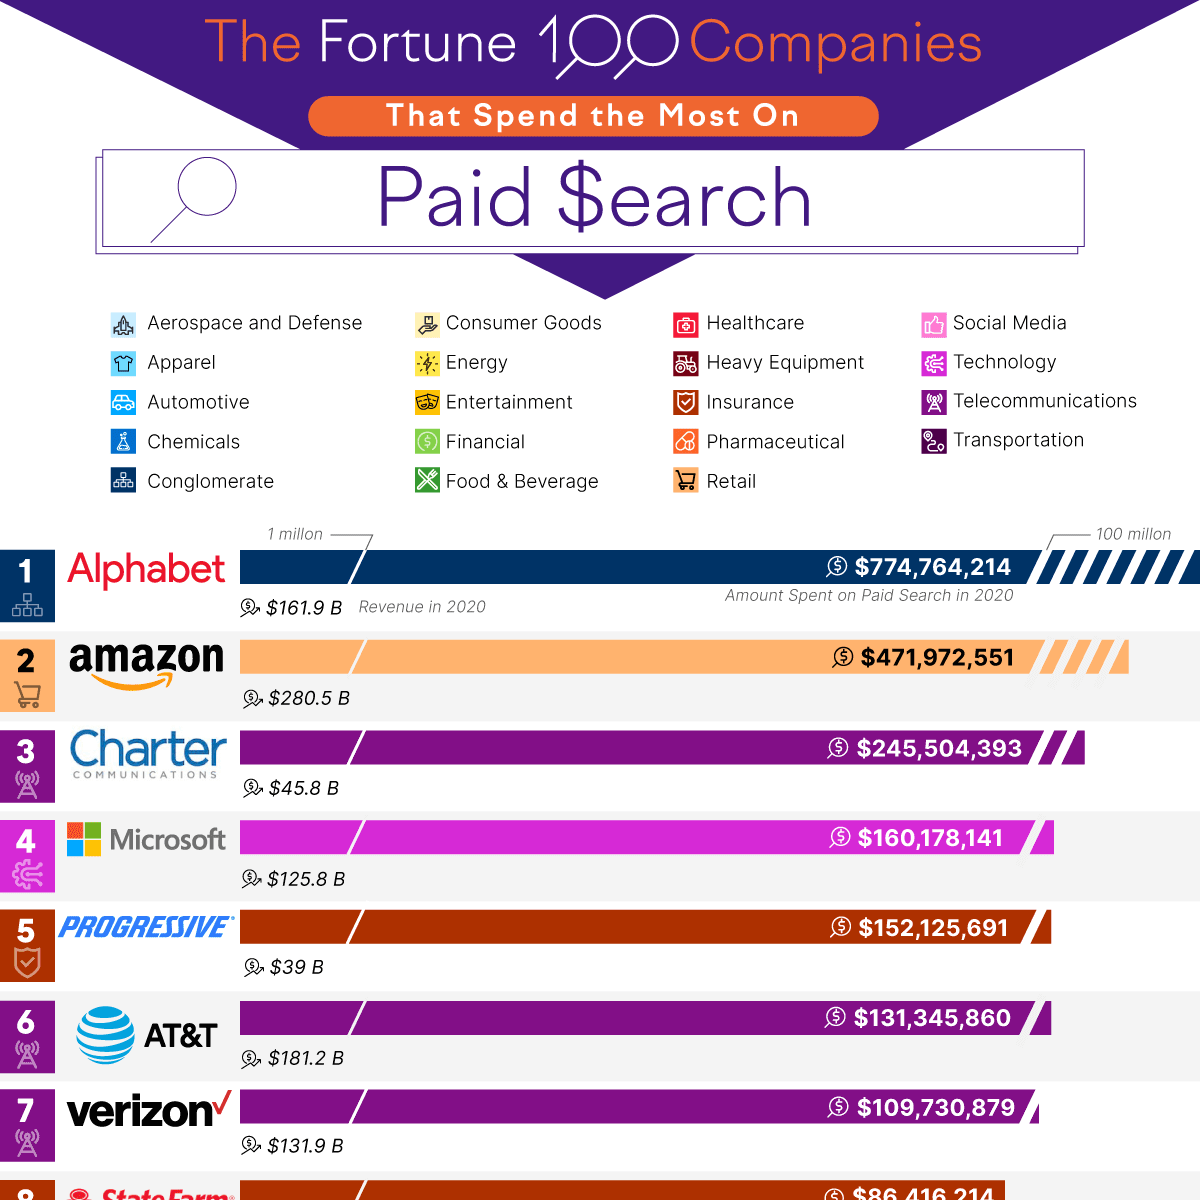 The Fortune 100 Companies That Spend the Most On Paid Search